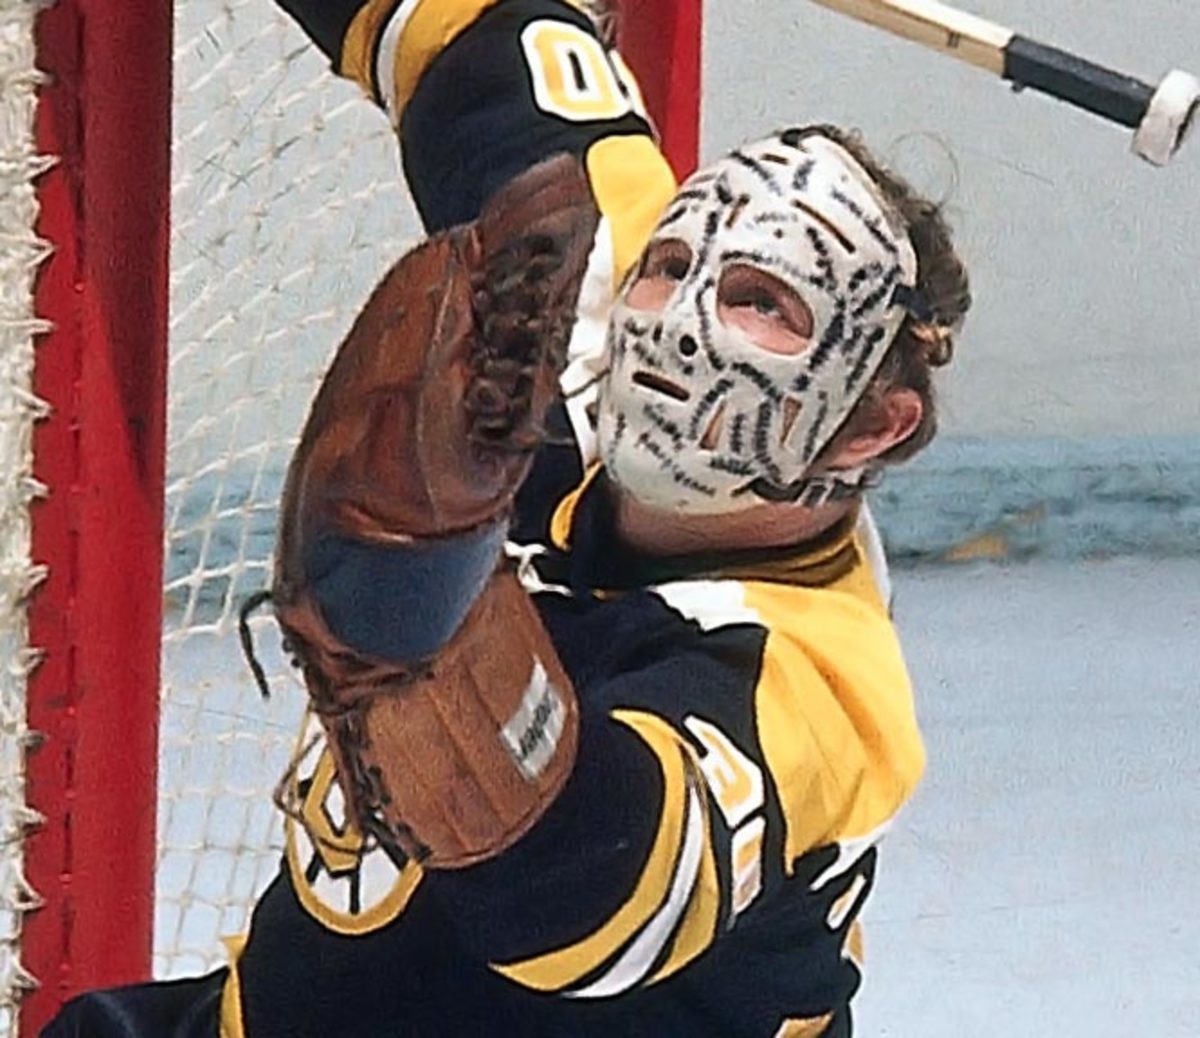 Gerry Cheevers mask